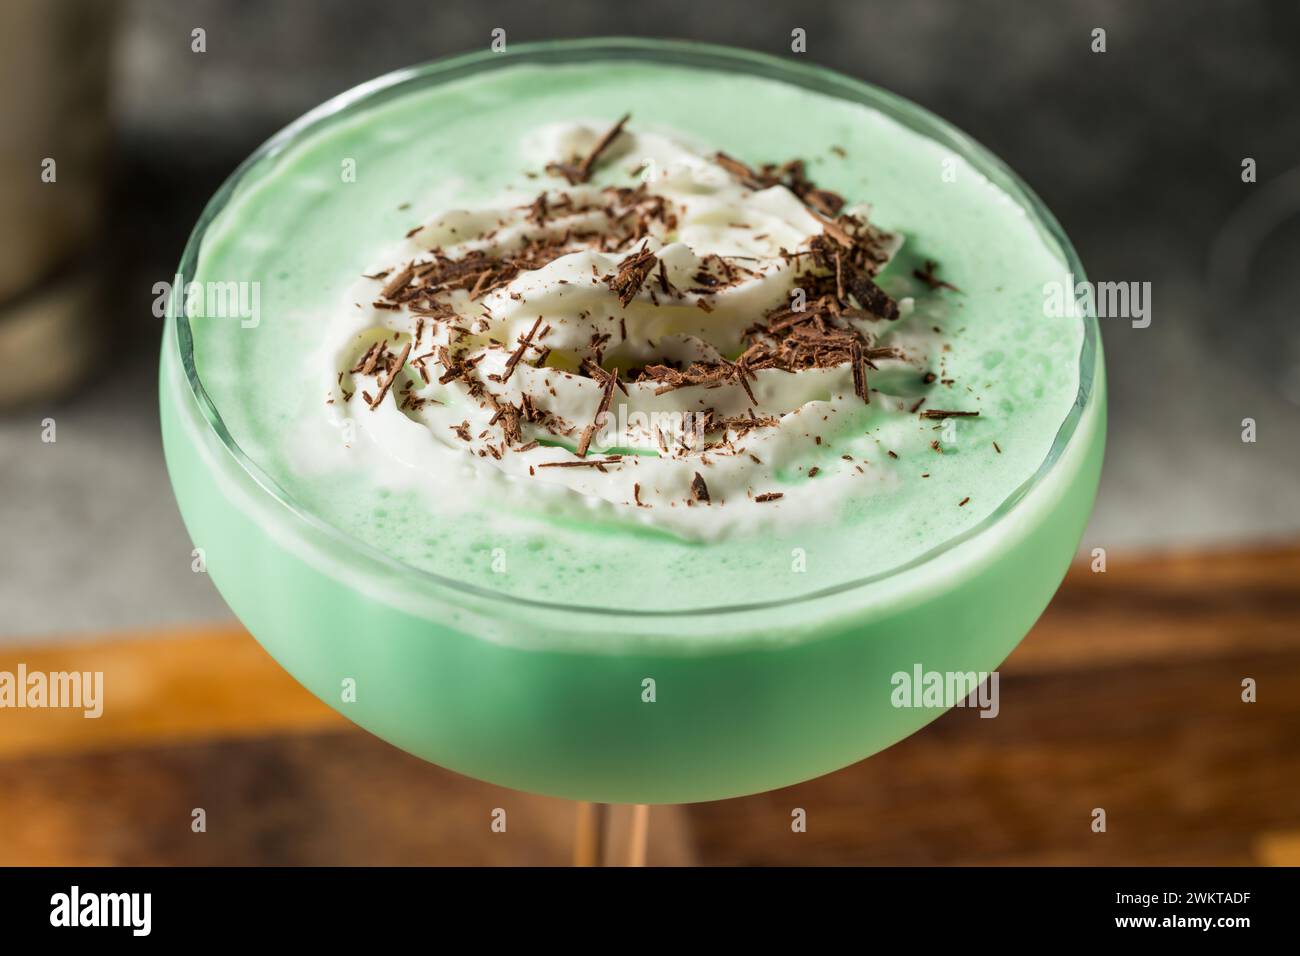 Boozy Cold Grasshopper Mint Martini with Chocolate and Vodka Stock Photo